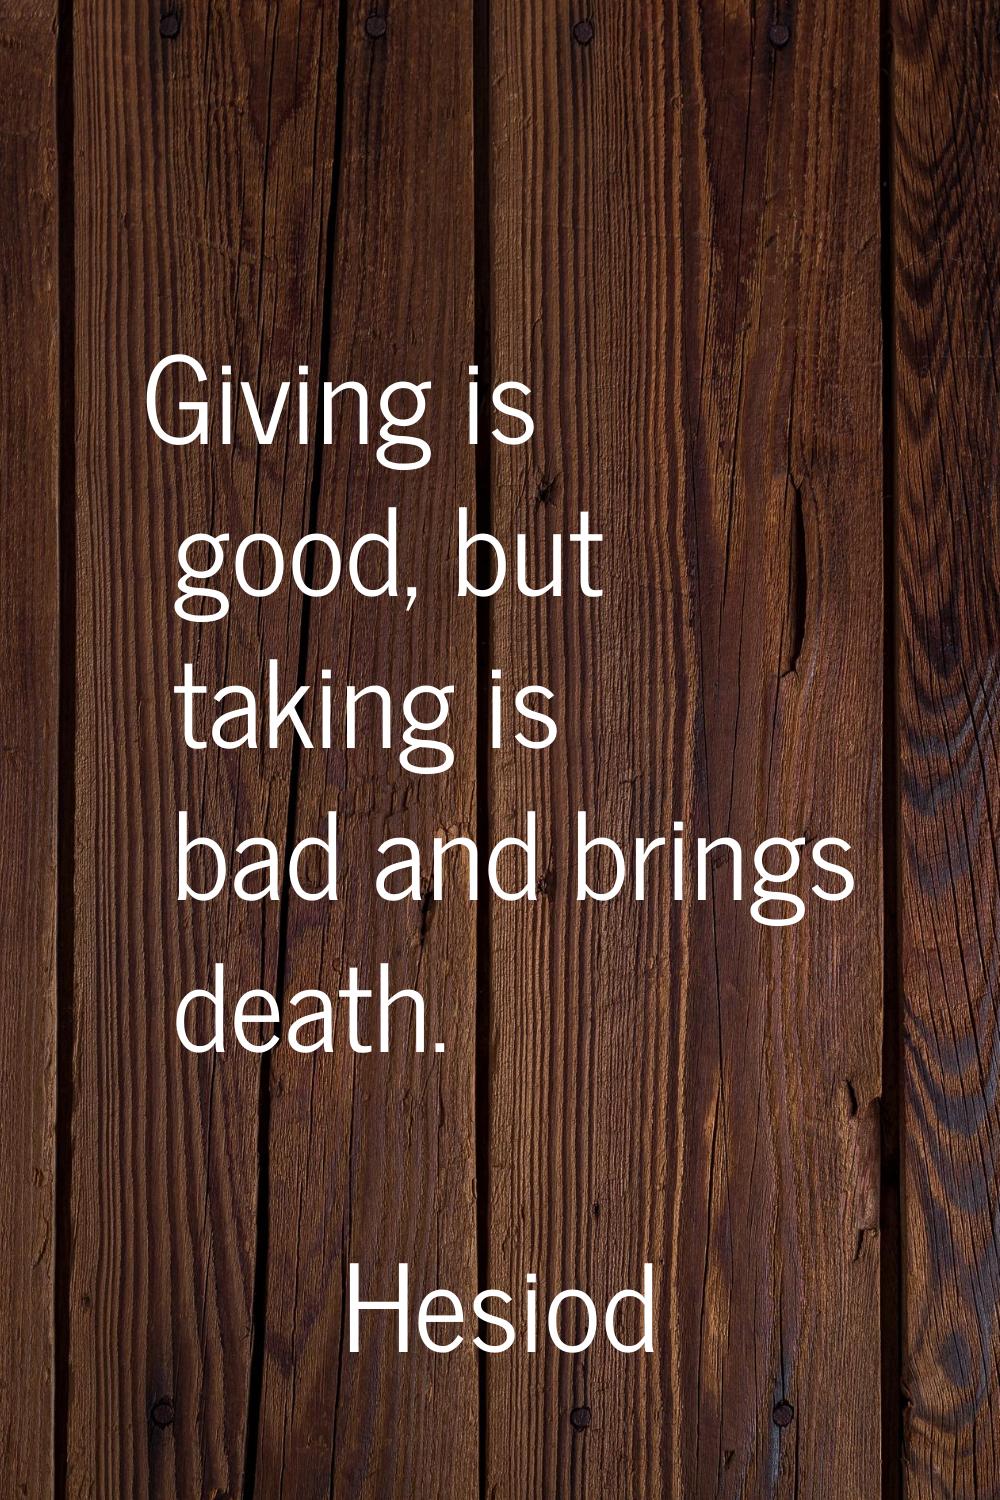 Giving is good, but taking is bad and brings death.